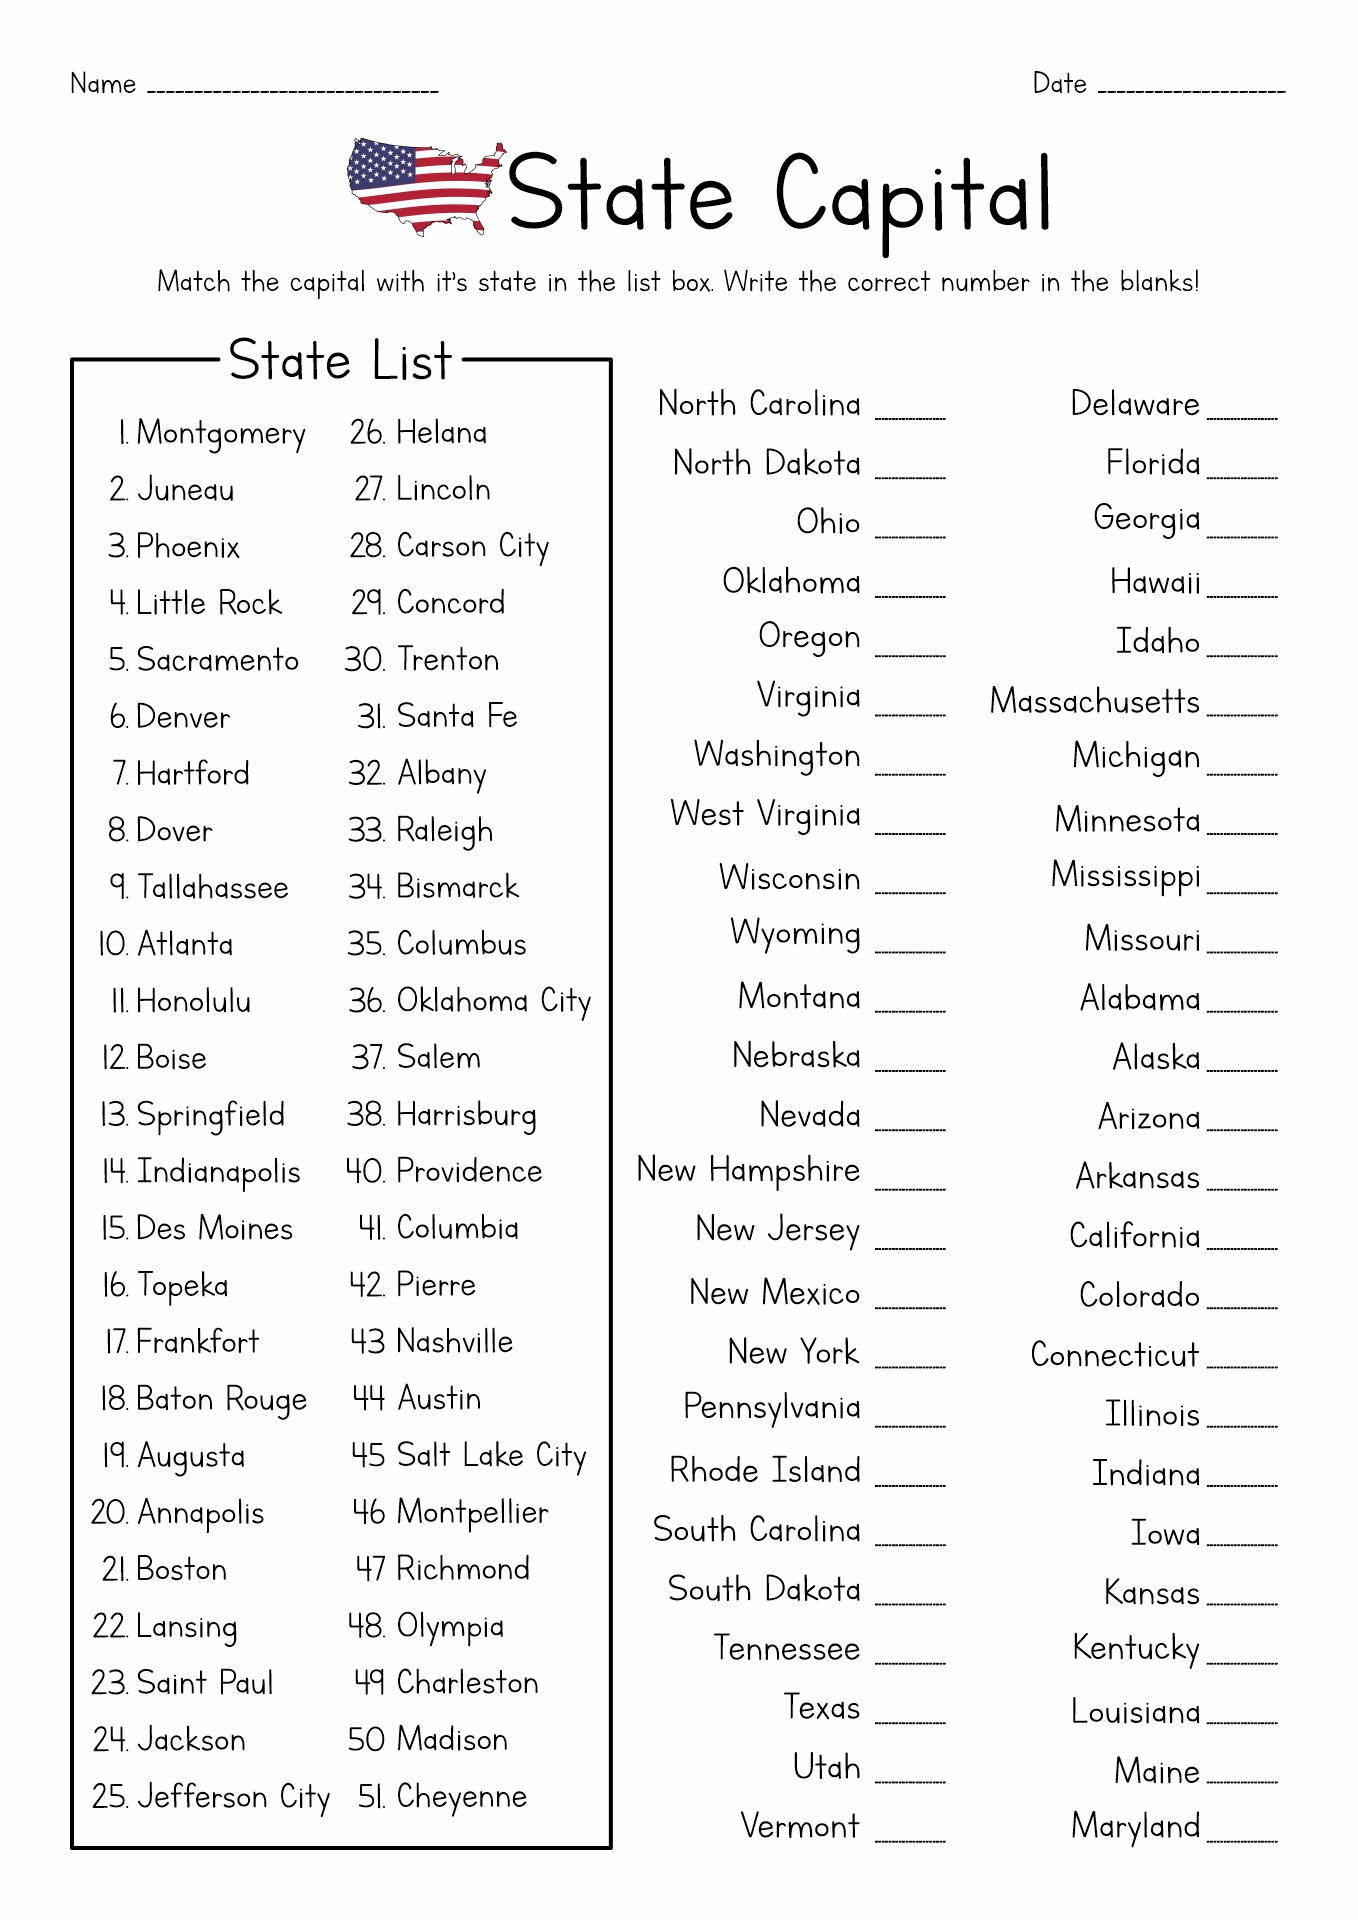 13-best-images-of-fifty-states-worksheets-blank-printable-united